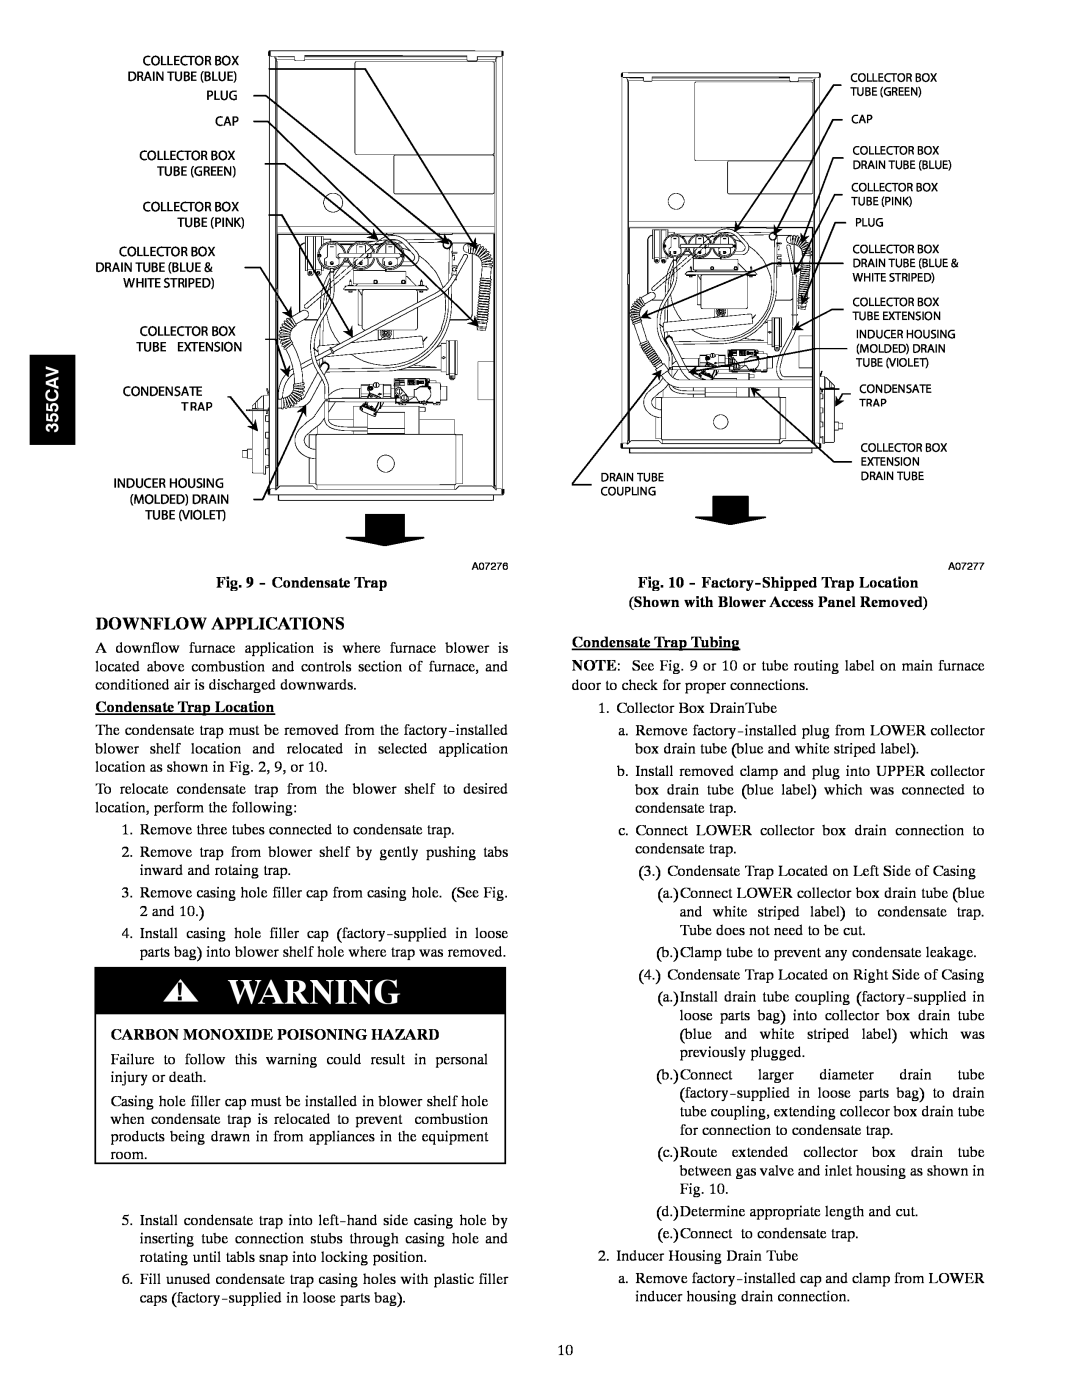 Bryant 355CAV installation instructions Downflow Applications, Condensate Trap Location, Condensate Trap Tubing 